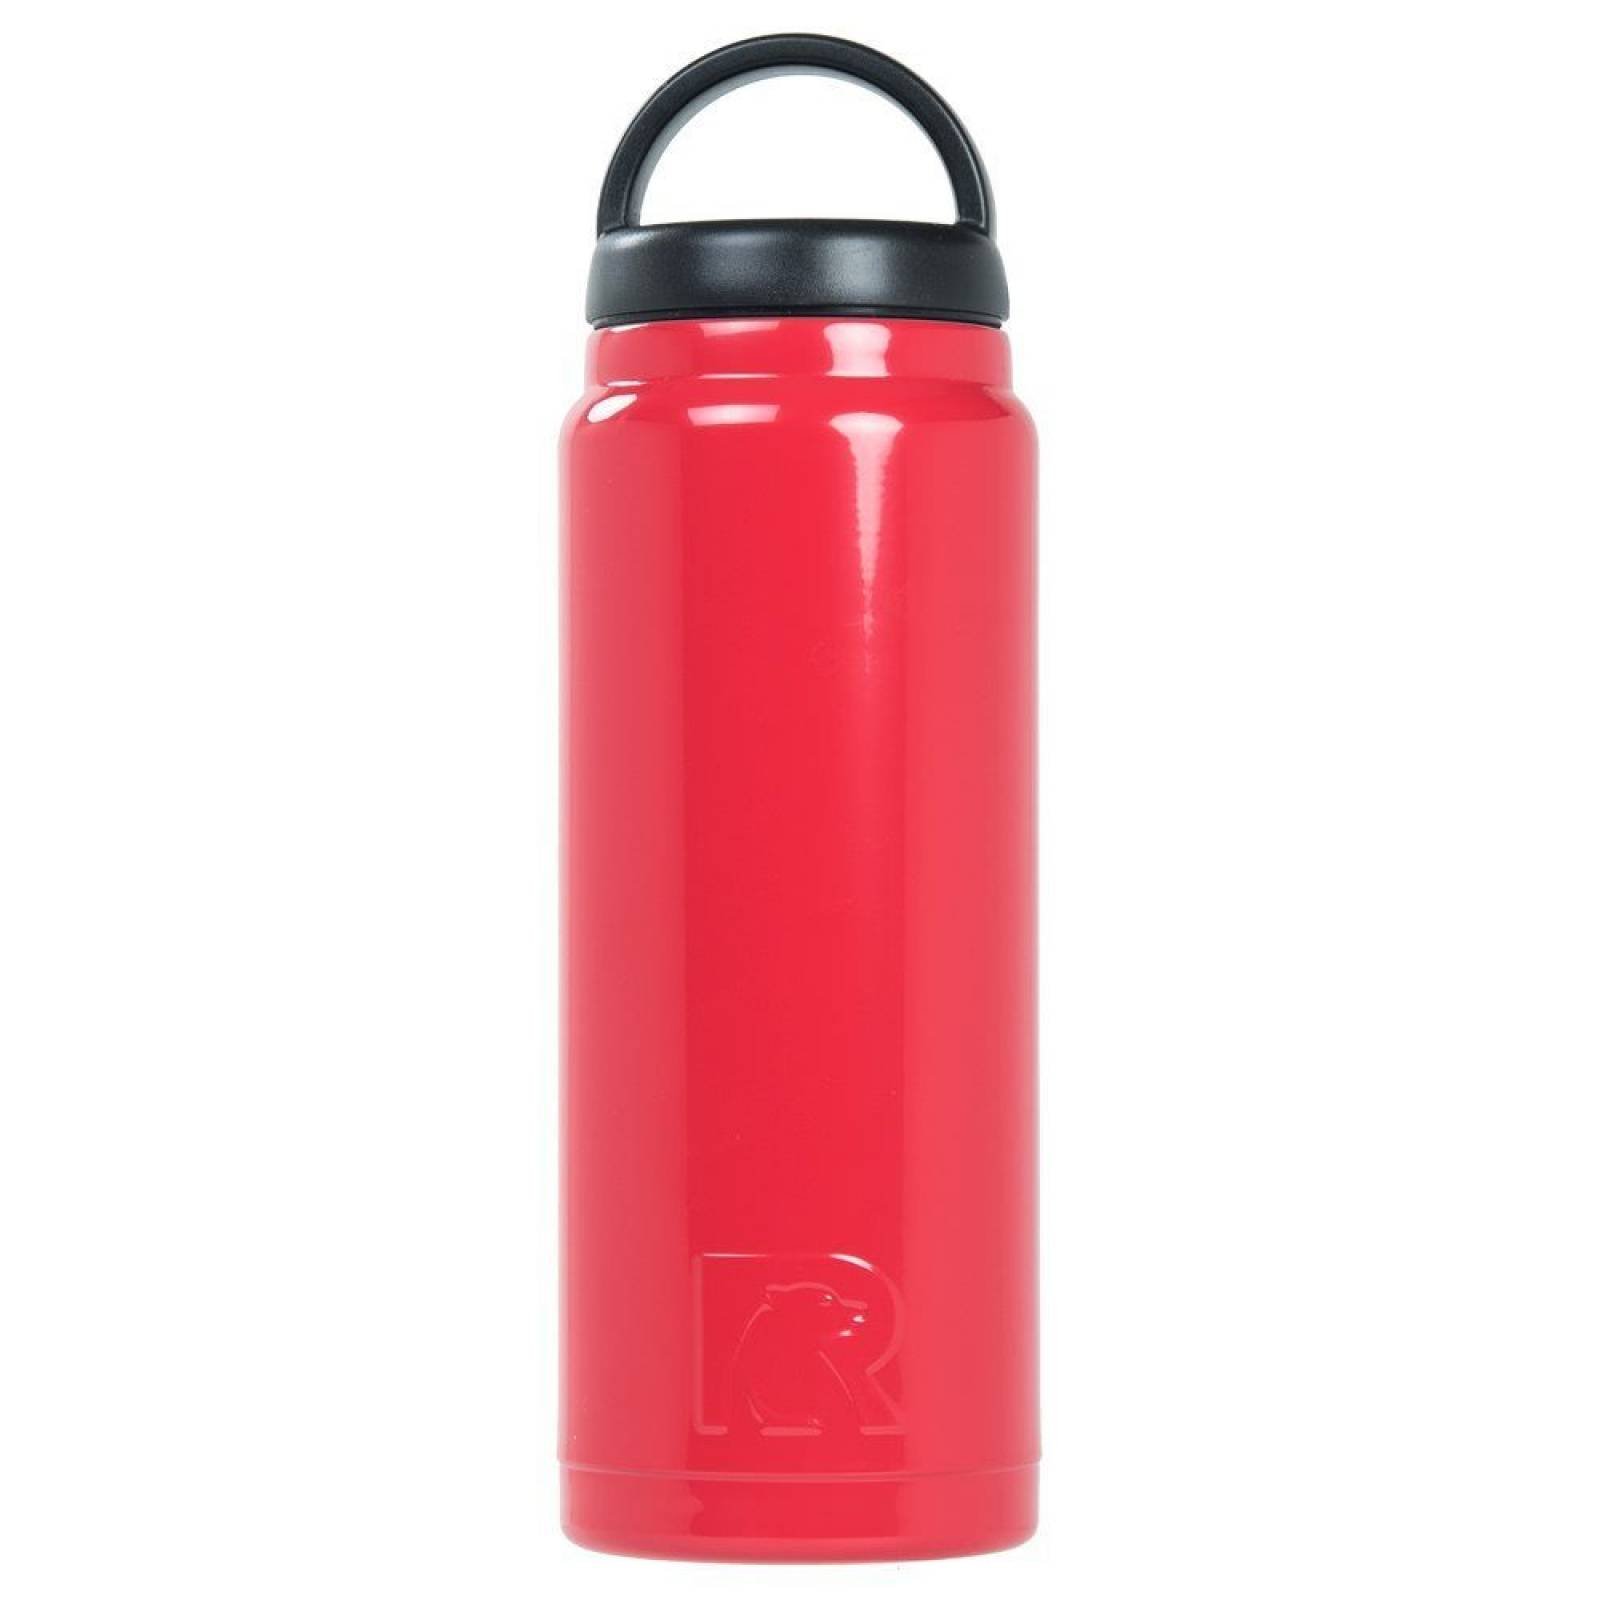 RTIC Bottle 26 oz. Red   583